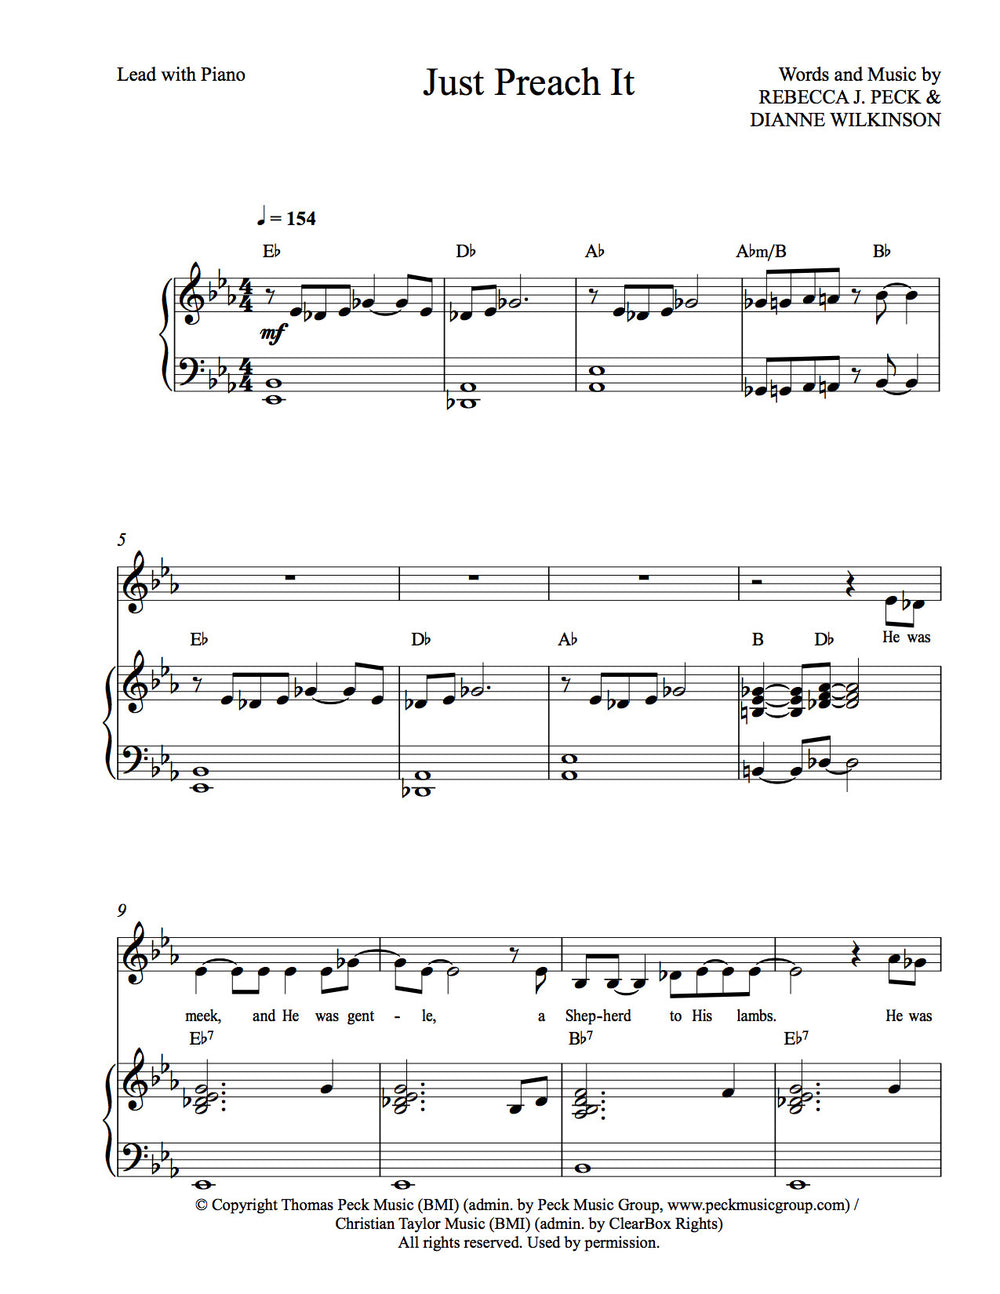 Just Preach It - sheet music - Digitally Delivered PDF